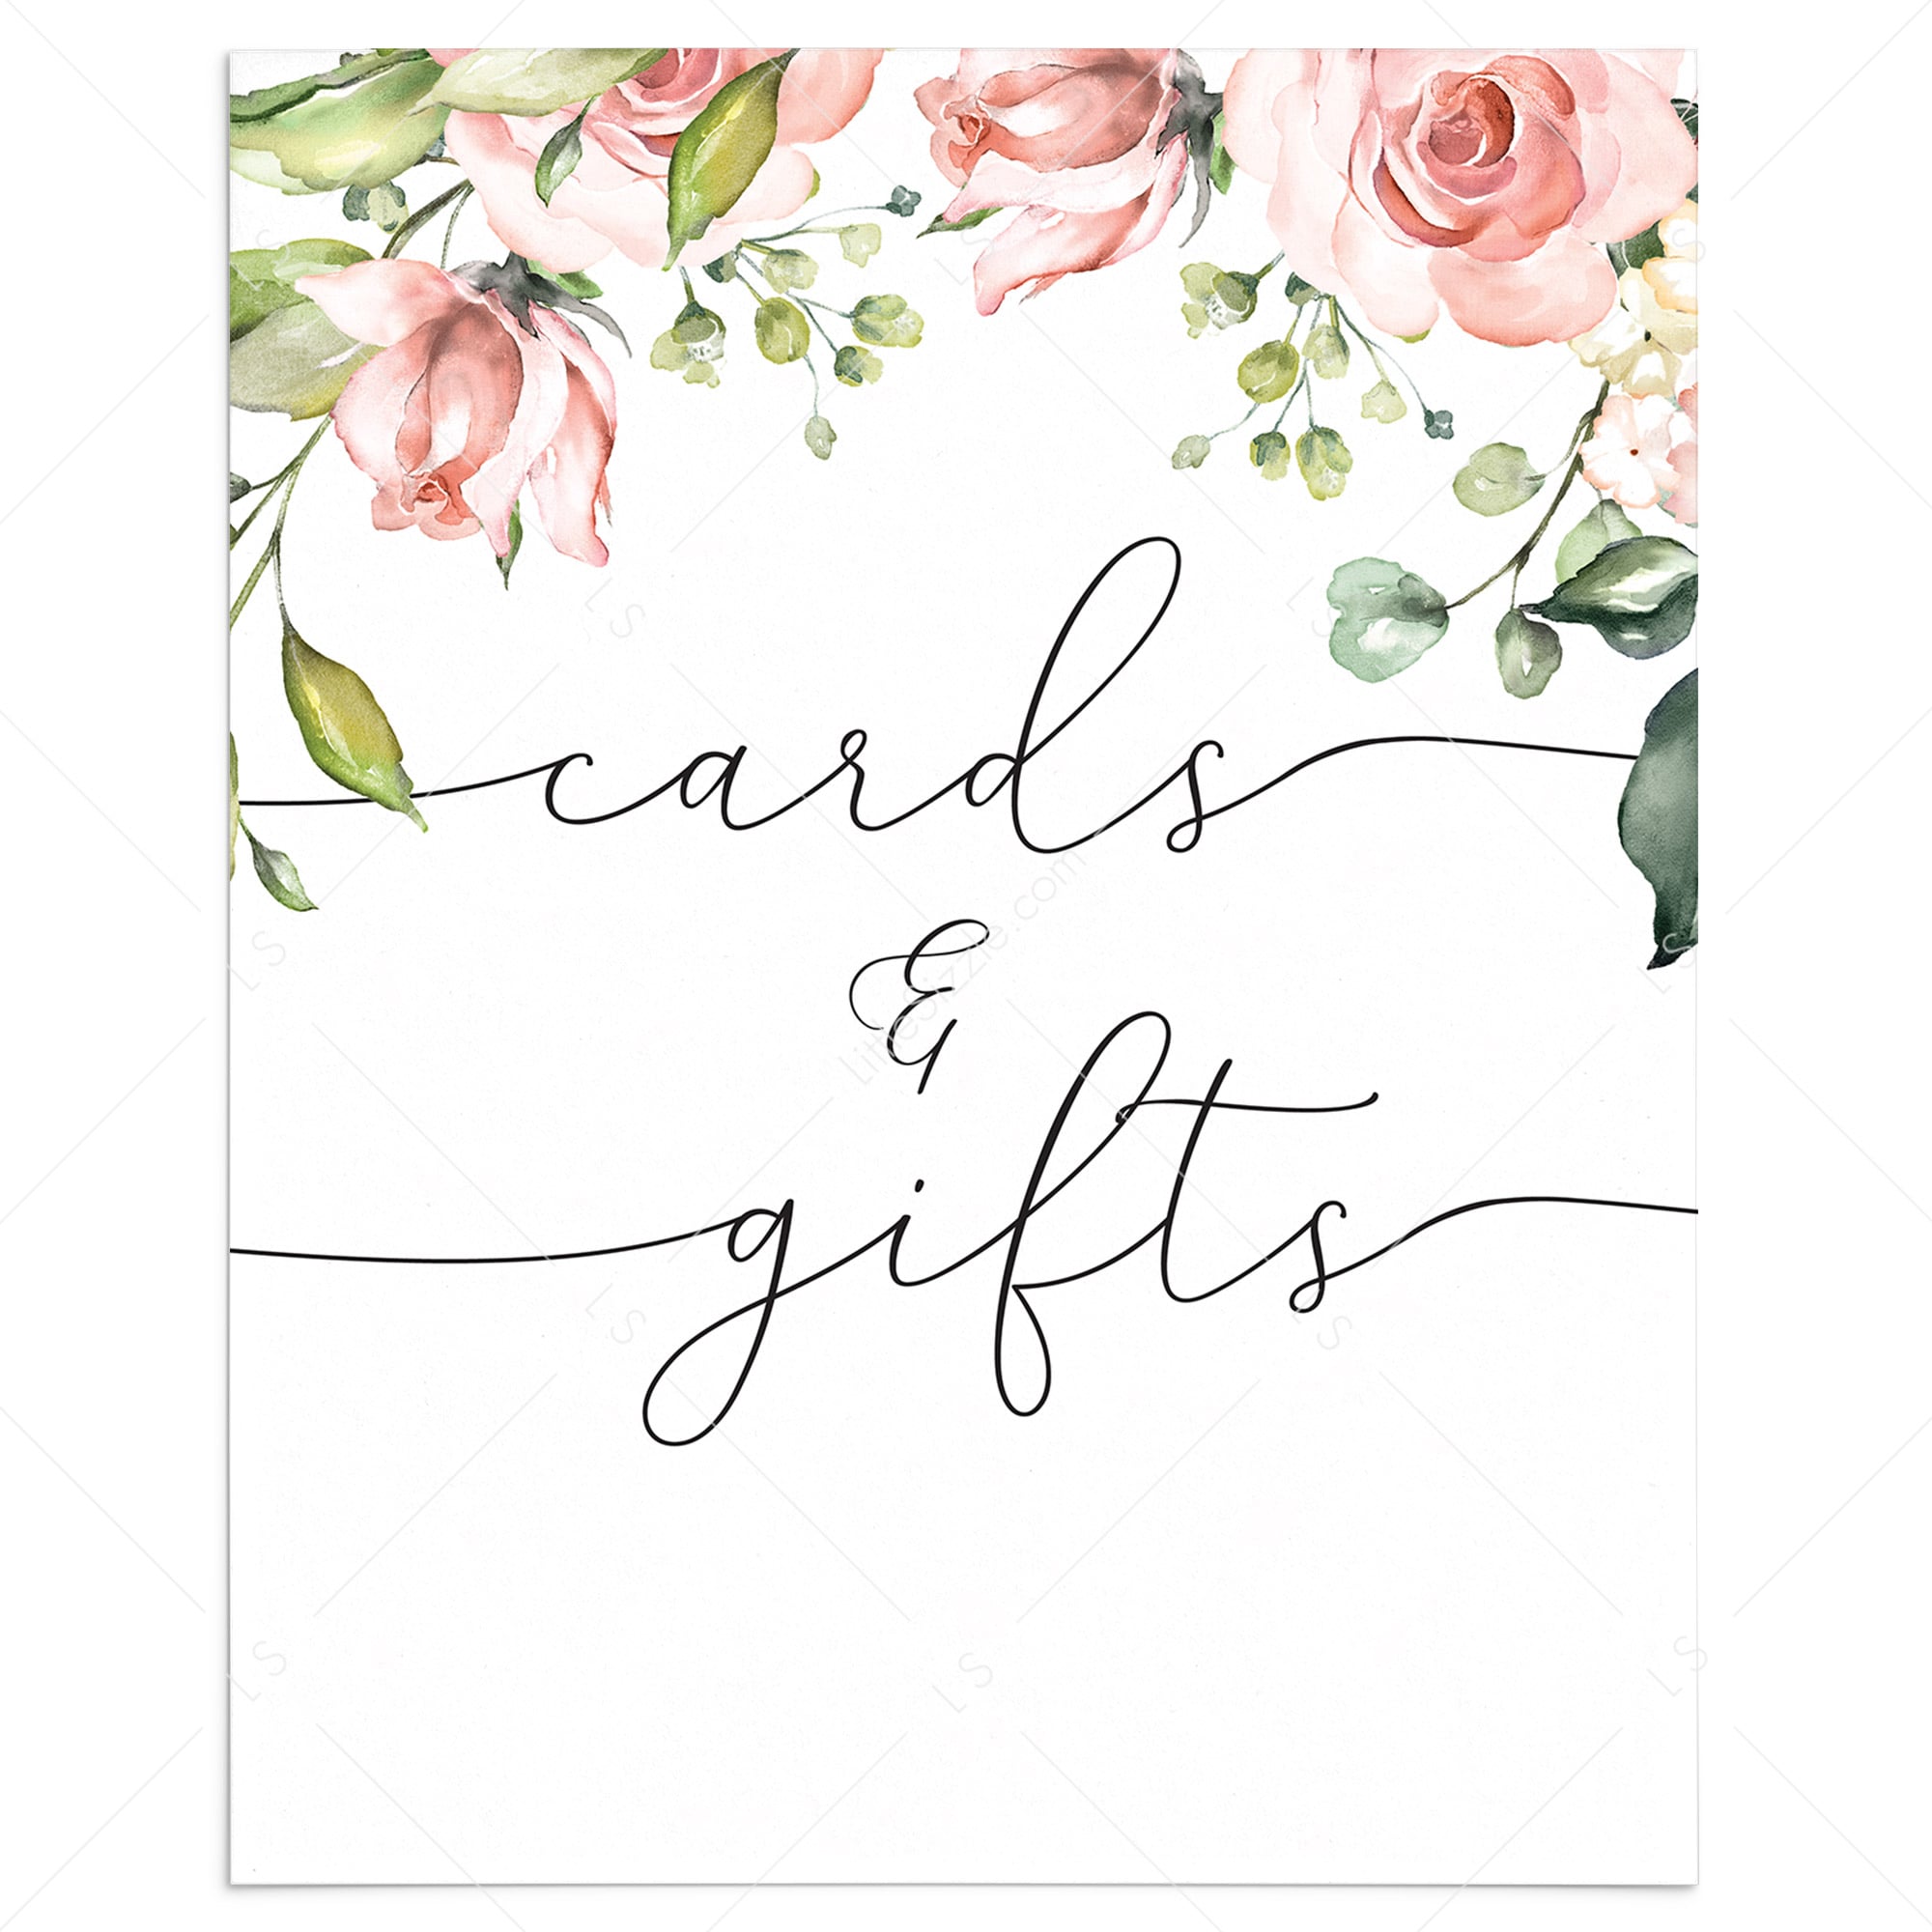 Blush floral cards and gifts table printable sign by LittleSizzle